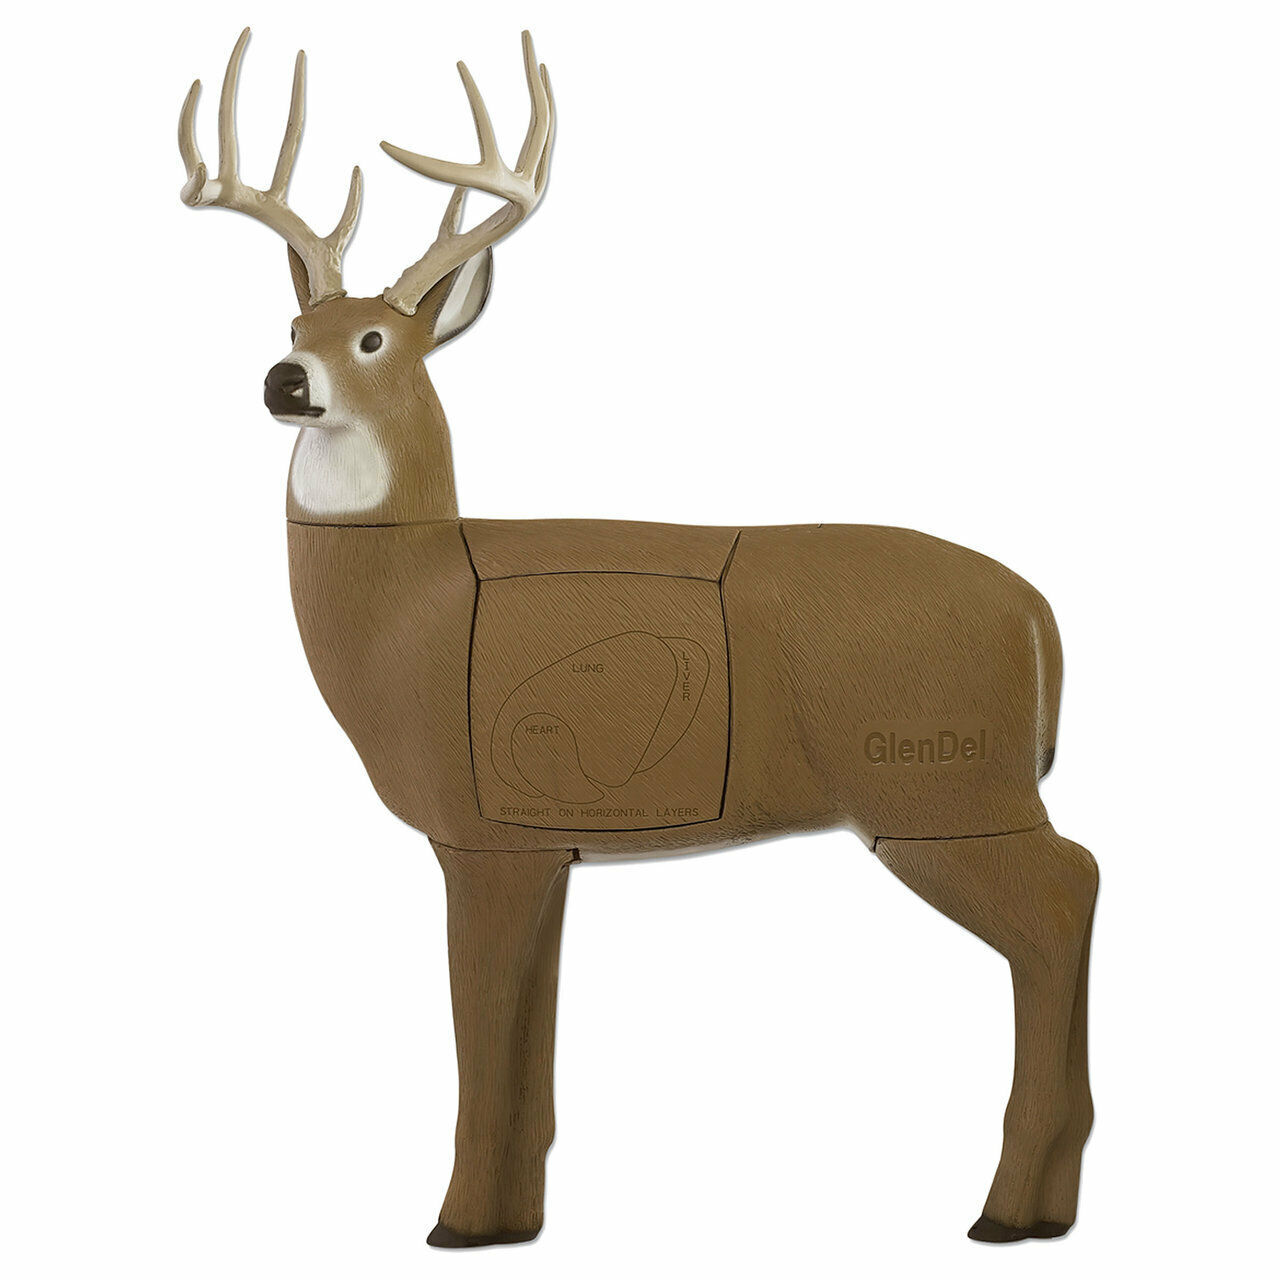 New BLOCK Targets GlenDel Buck 3D Archery Target with Replaceable 4-sided